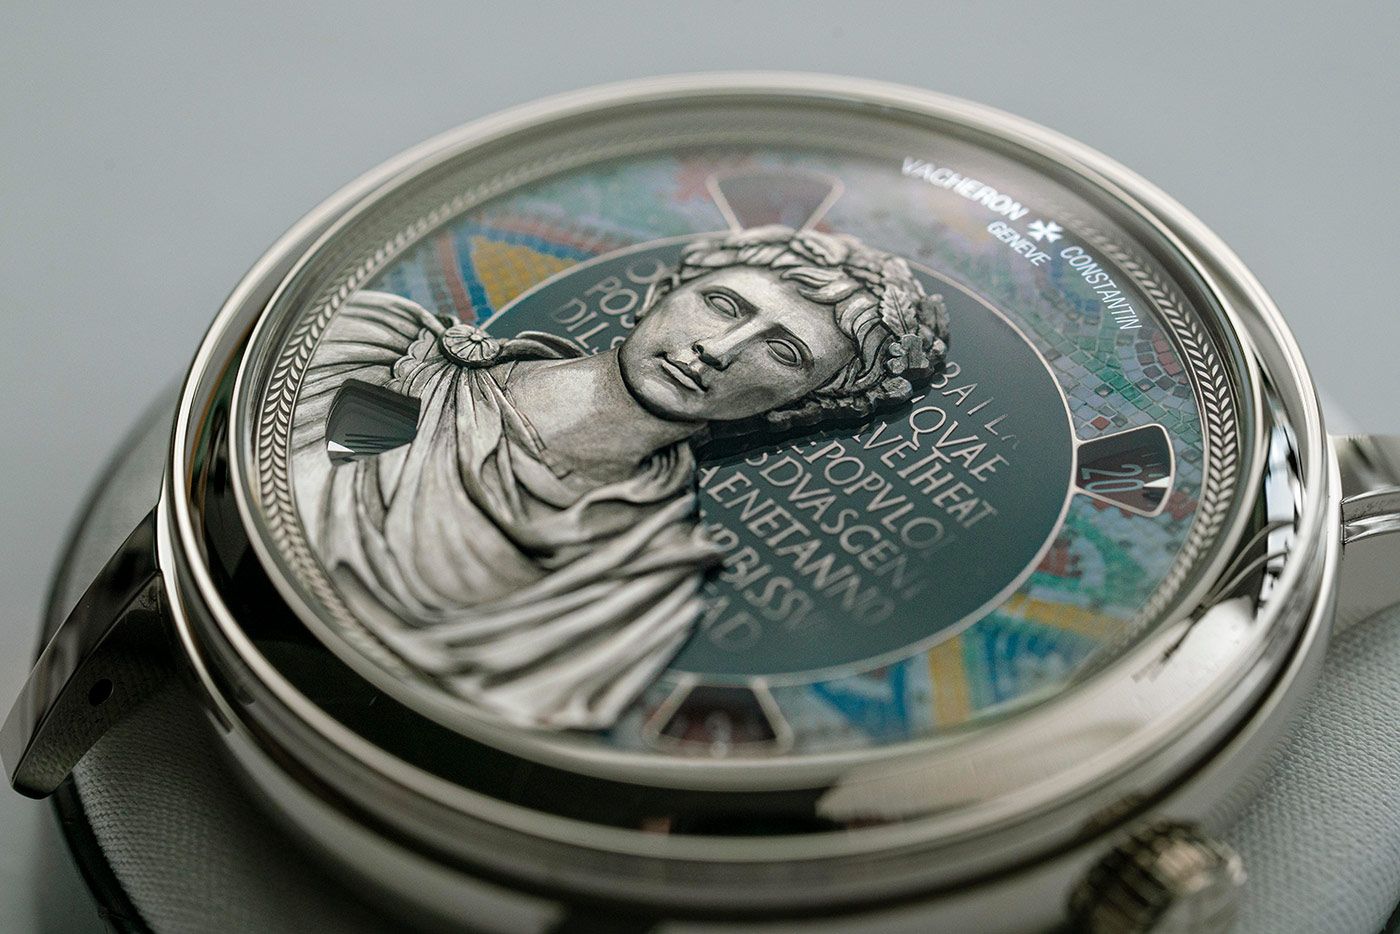 Vacheron Constantin Métiers d’Art Buste d’Auguste watch dial featuring the bust of Octavian Augustus, from the Tribute to Great Civilisations collection